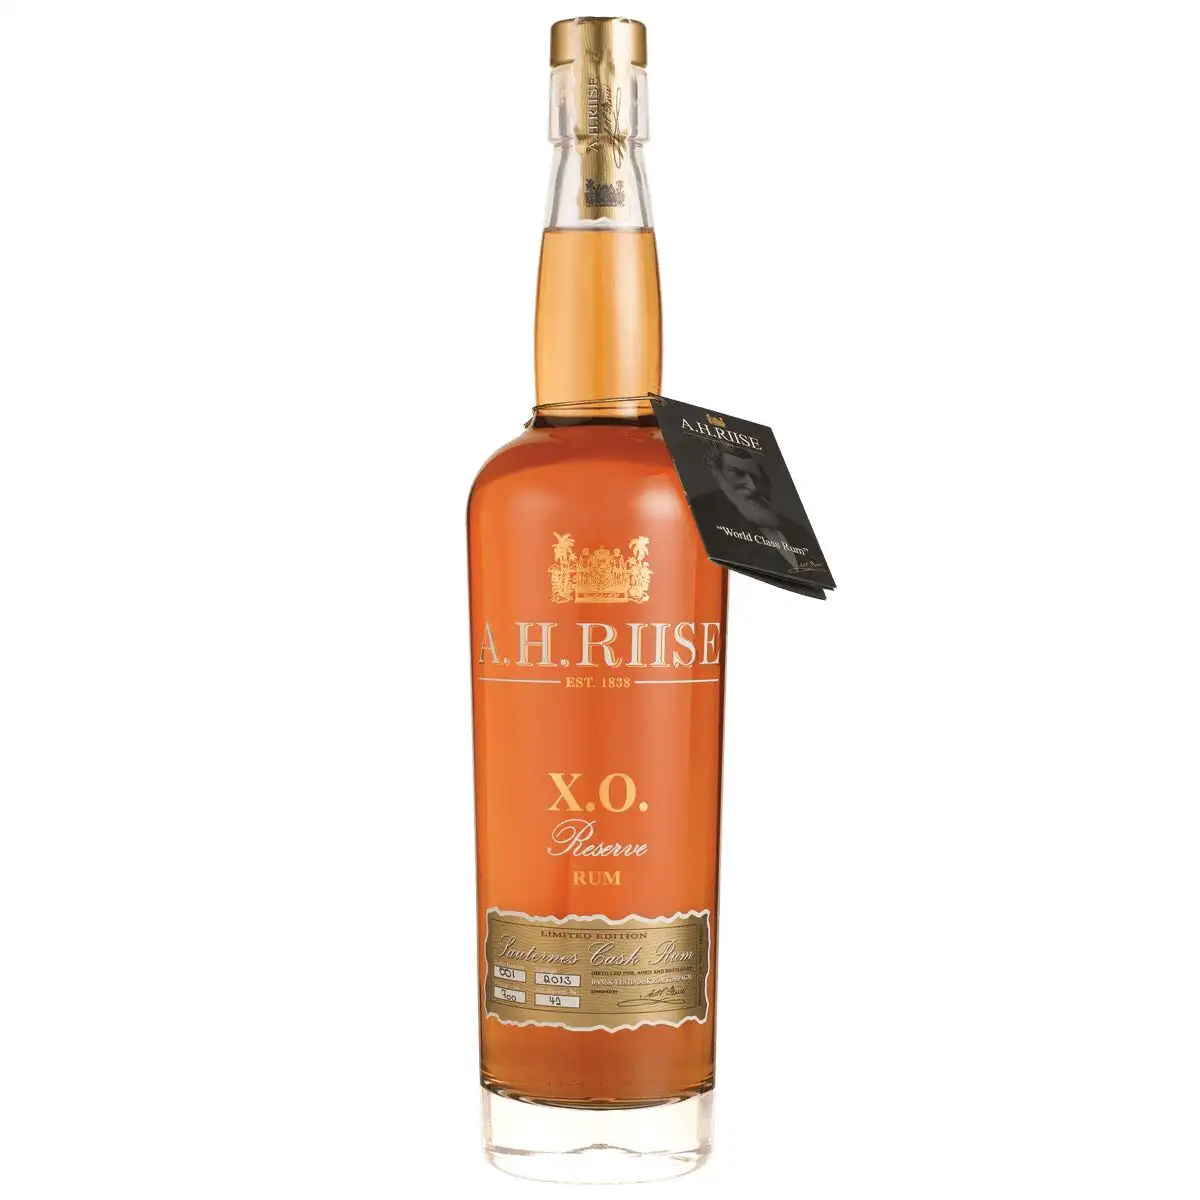 Image of the front of the bottle of the rum XO Sauternes Cask Rum